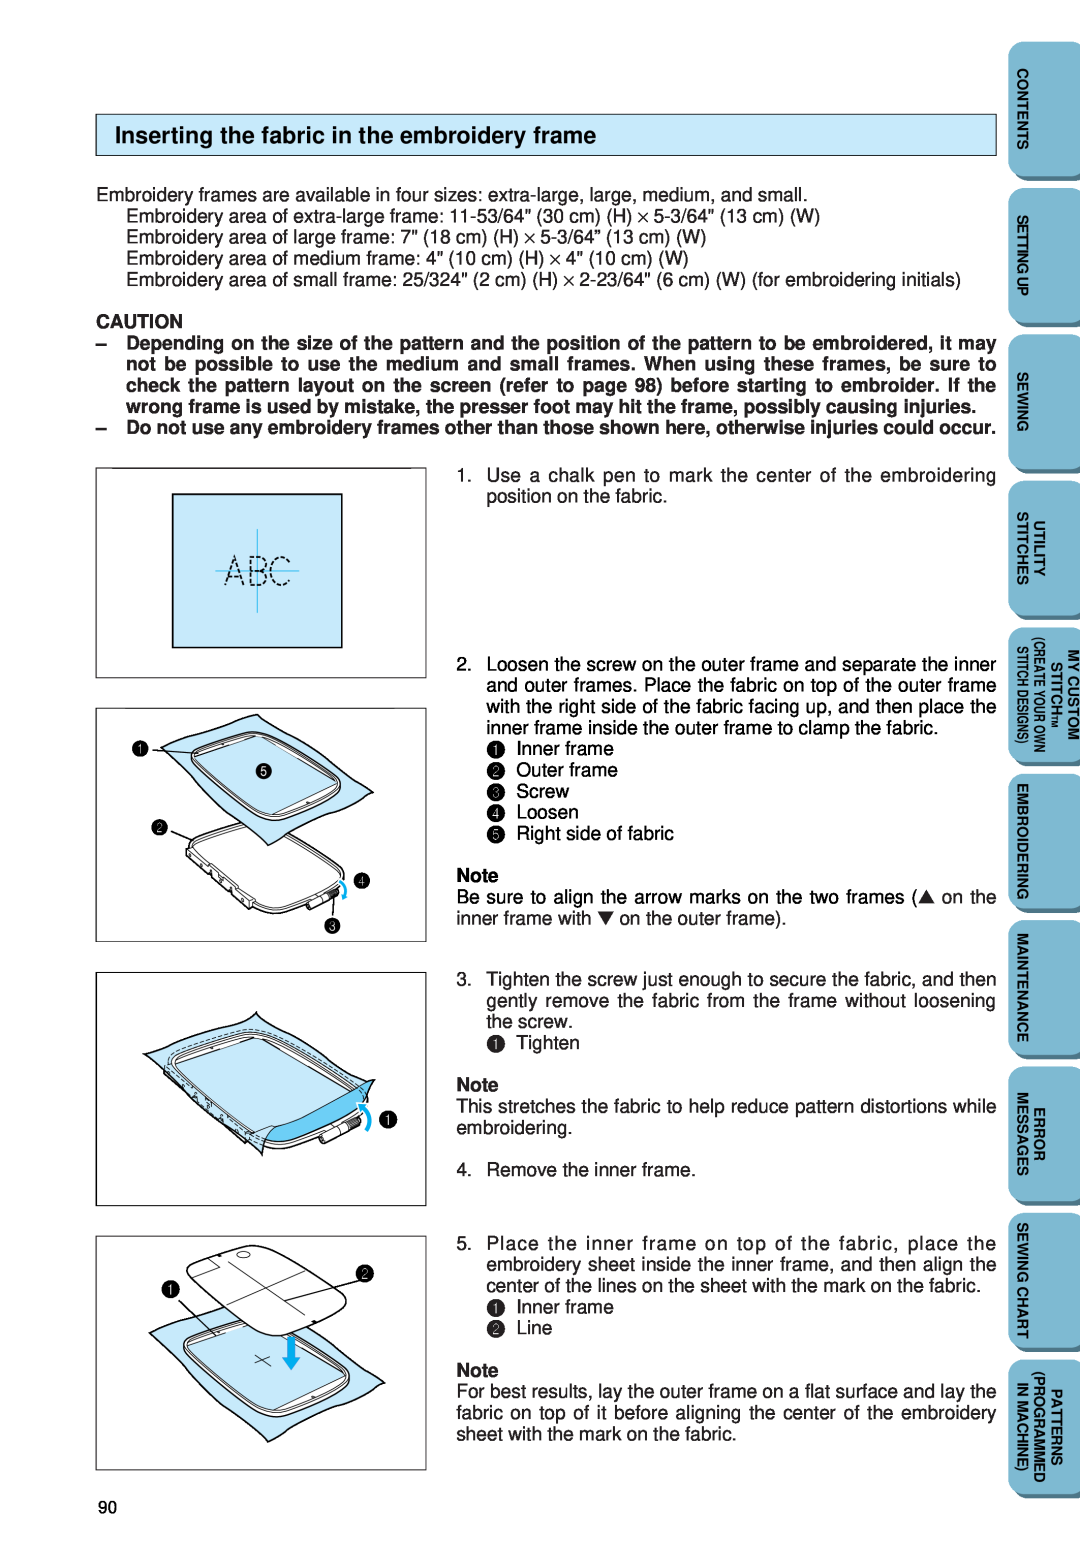 Brother PC 6500 operation manual Inserting the fabric in the embroidery frame 